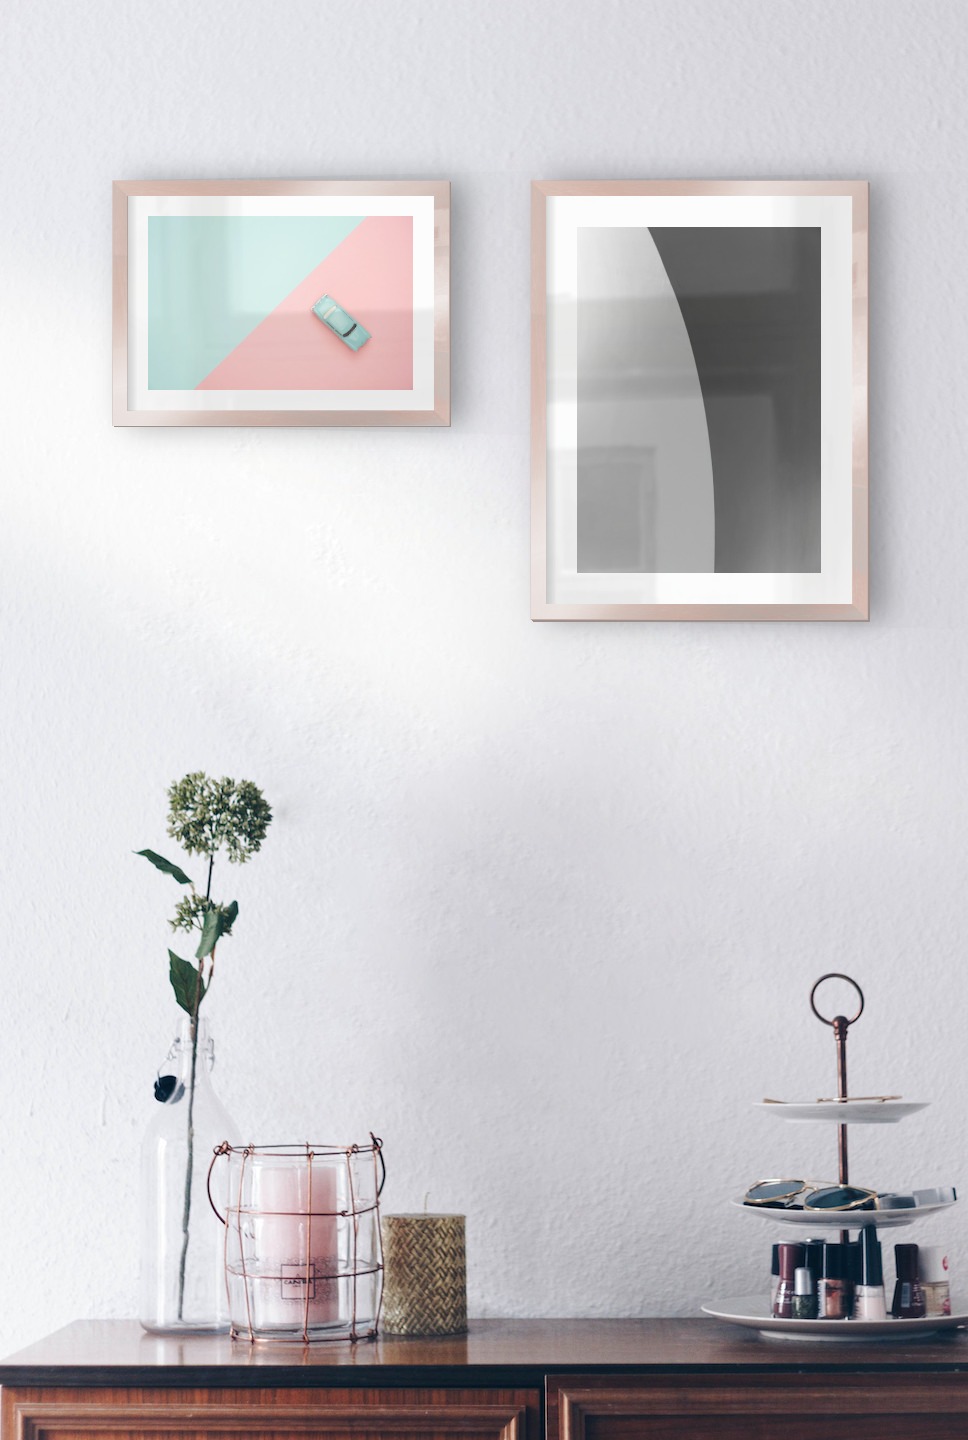 Gallery wall with picture frames in copper in sizes 21x30 and 30x40 with prints "Blue car and pink" and "Line"